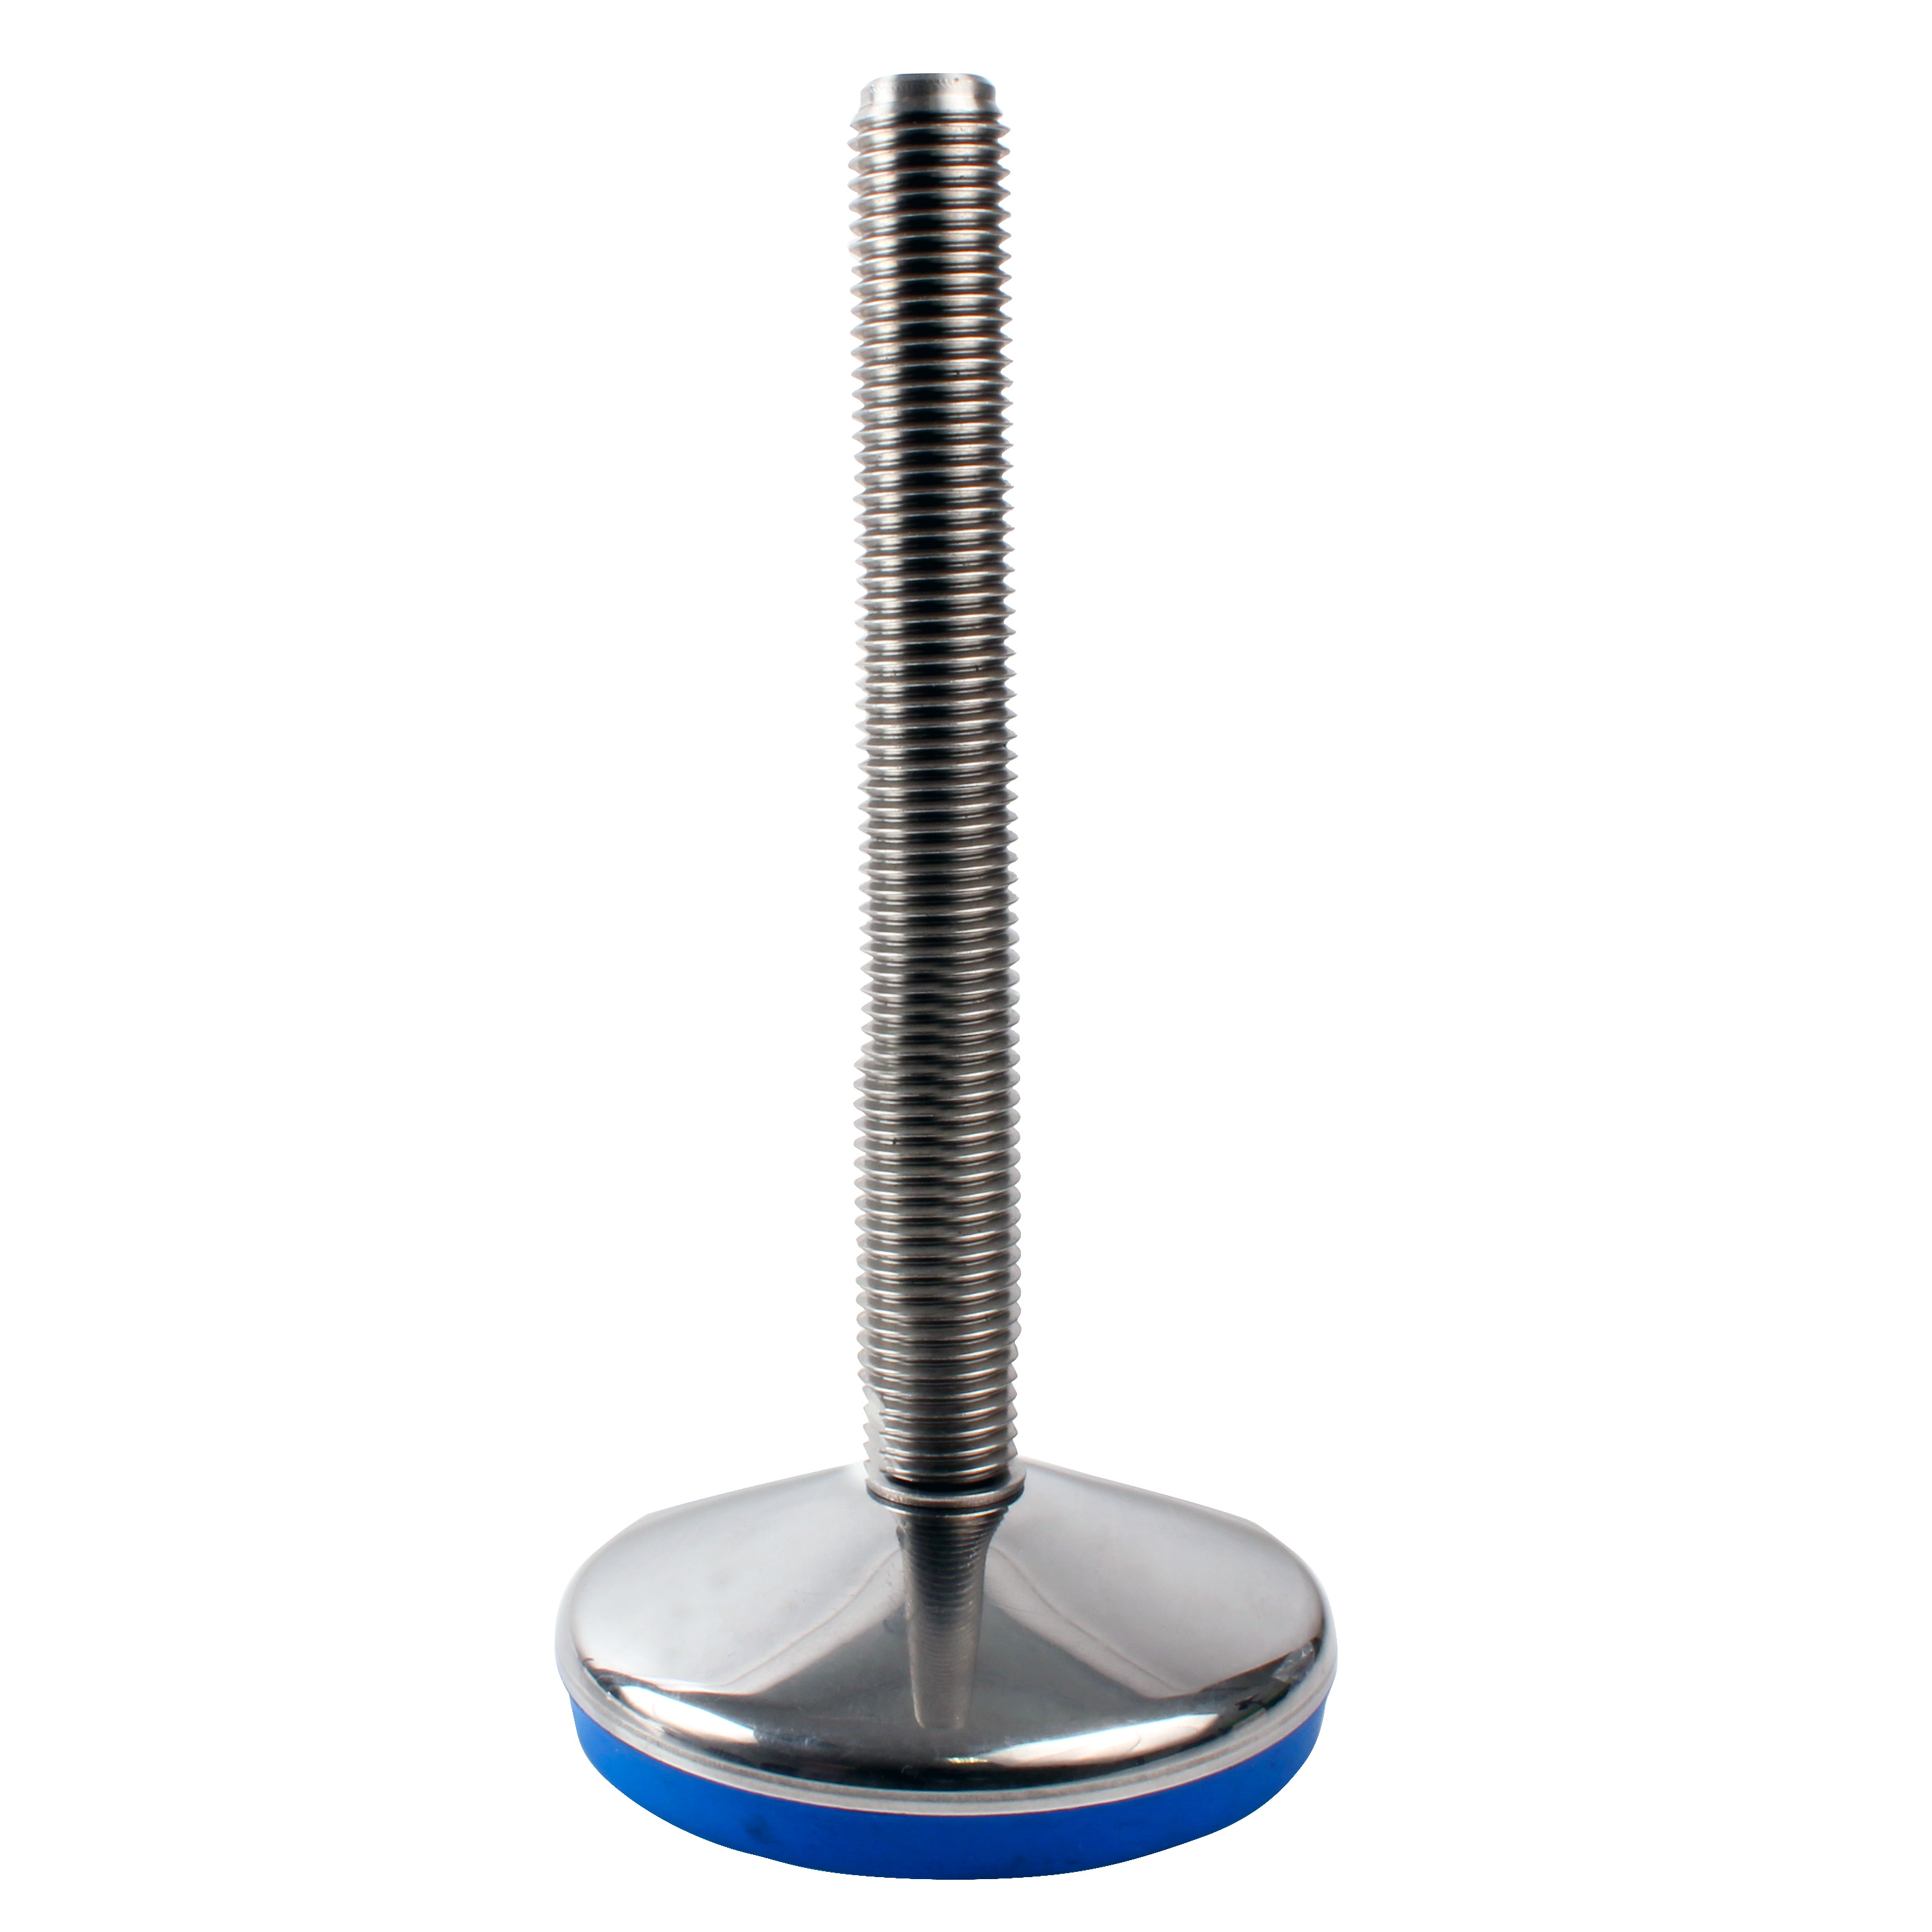 Articulated levelling foot, pressed base Ø80 - Ø 80 - Stainless steel - 